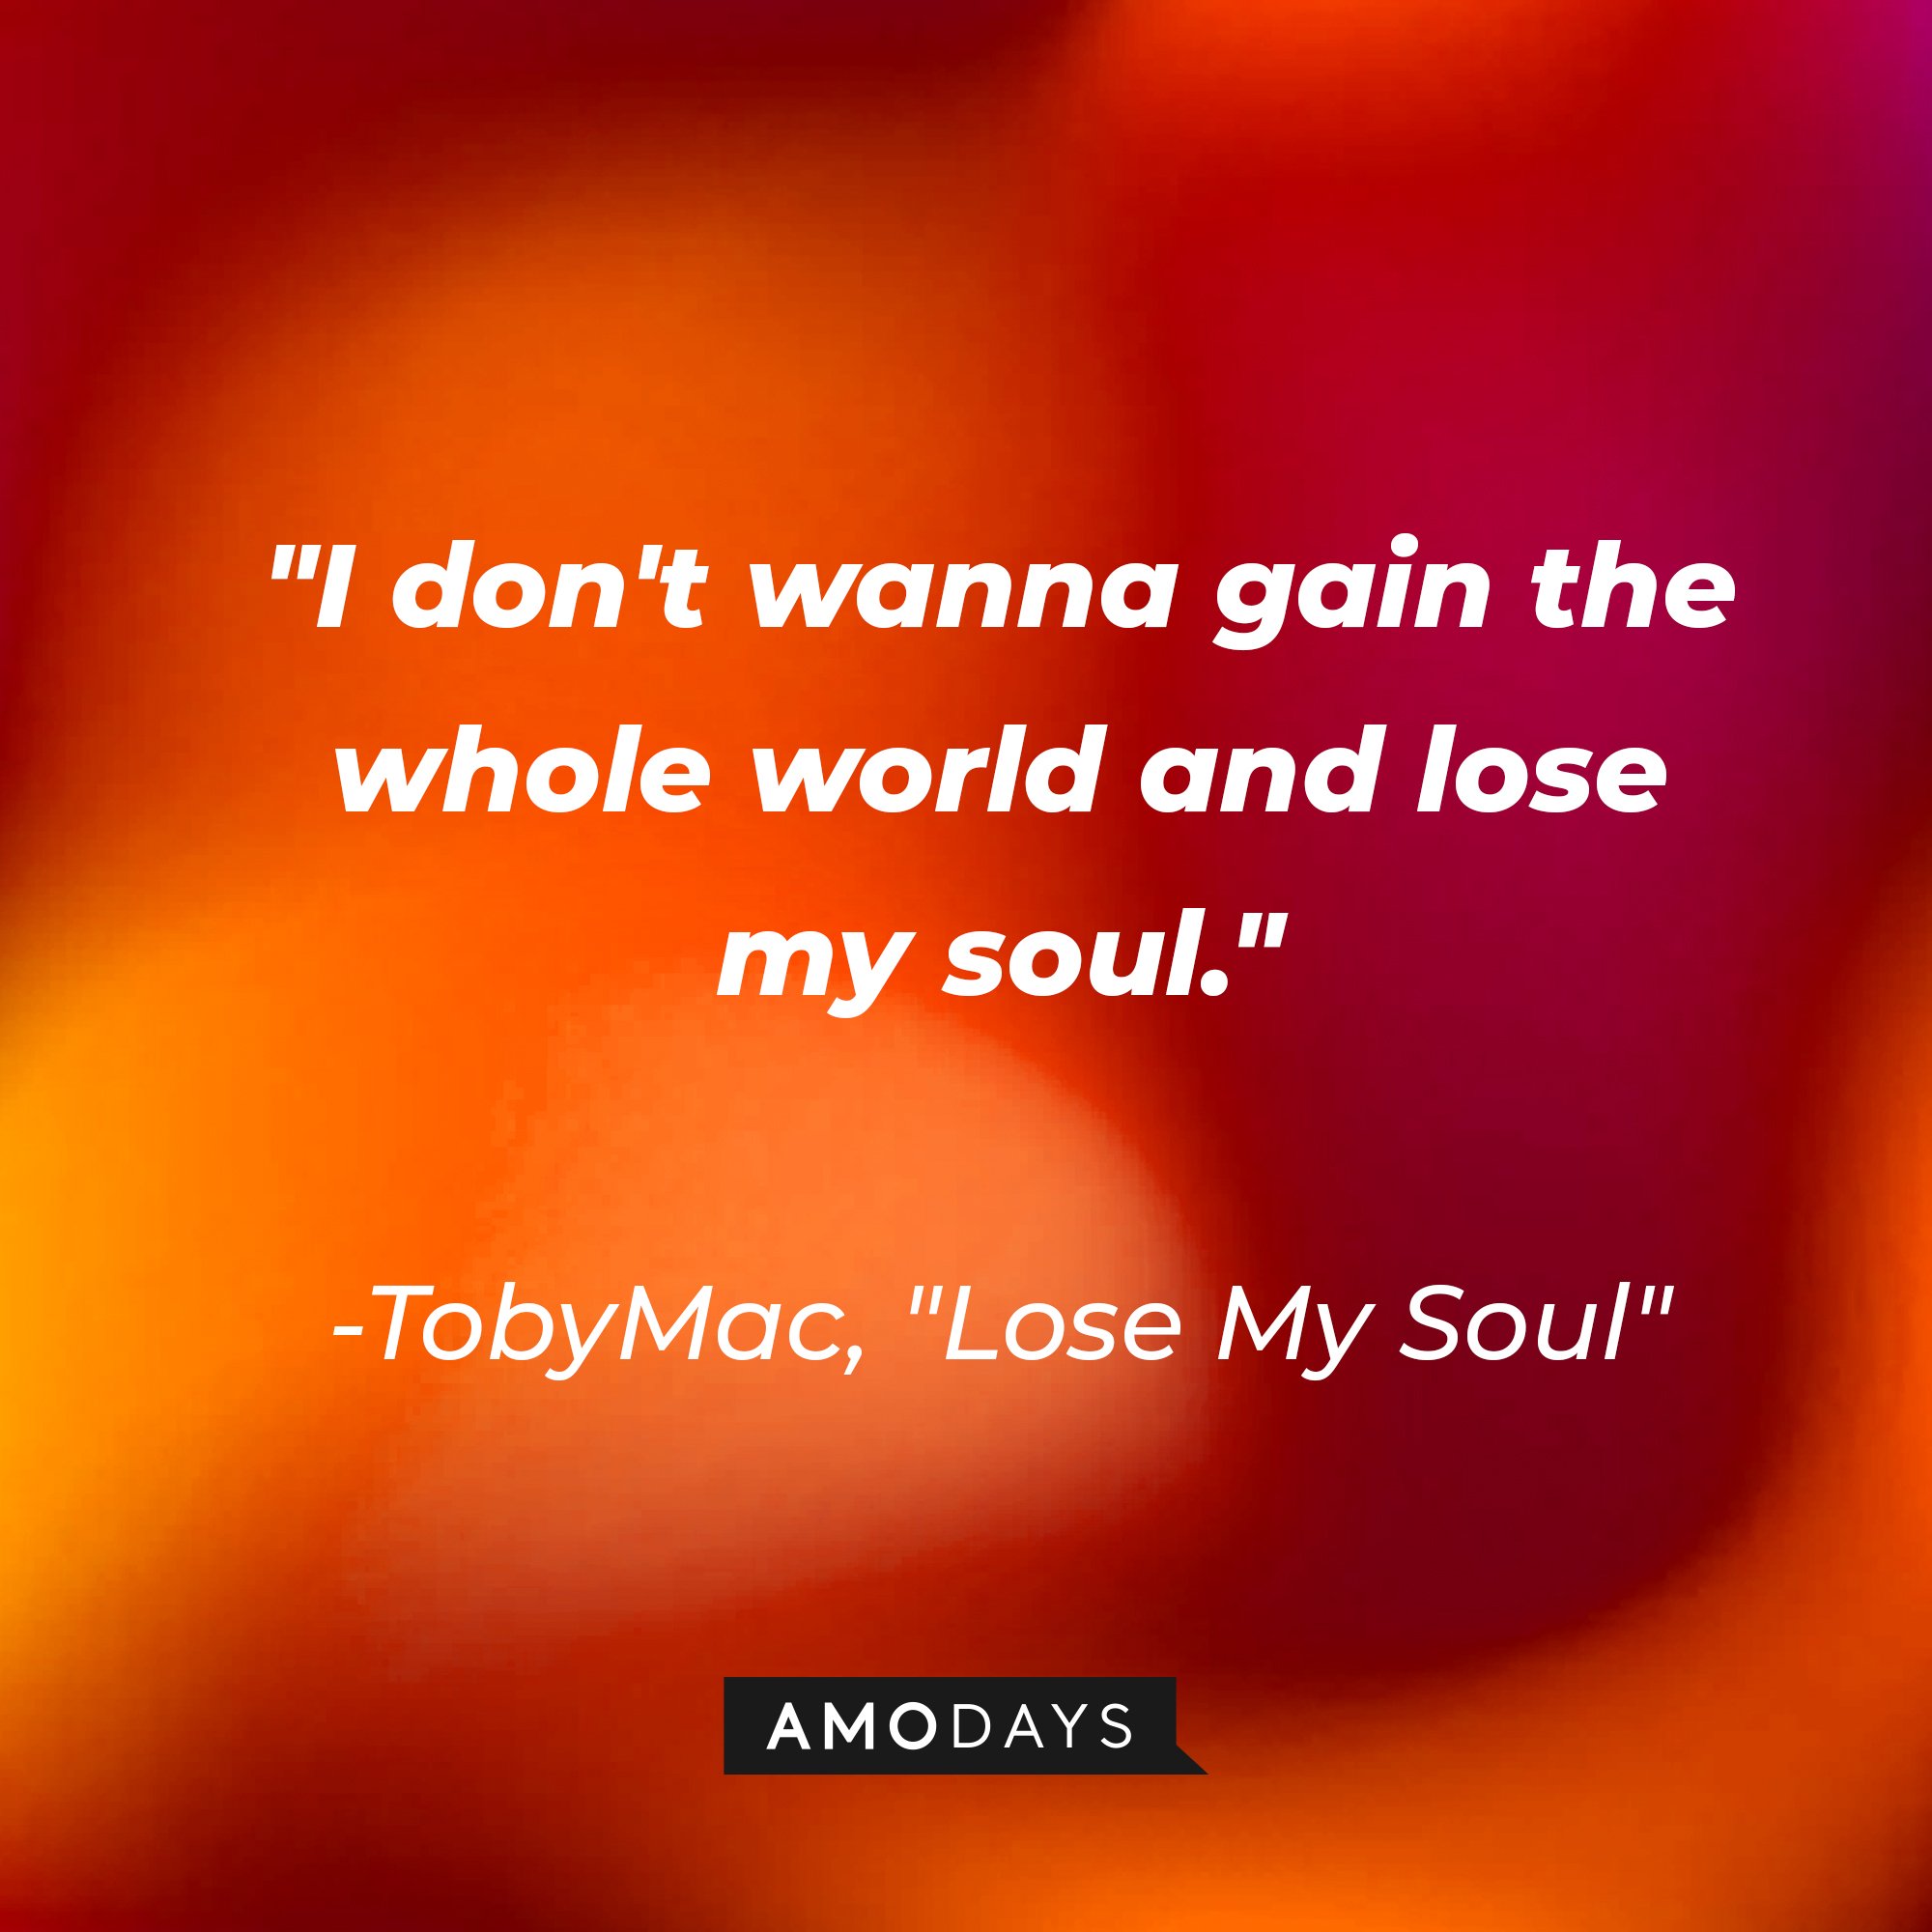 TobyMac's "Lose My Soul" quote: "I don't wanna gain the whole world and lose my soul." | Image: AmoDays